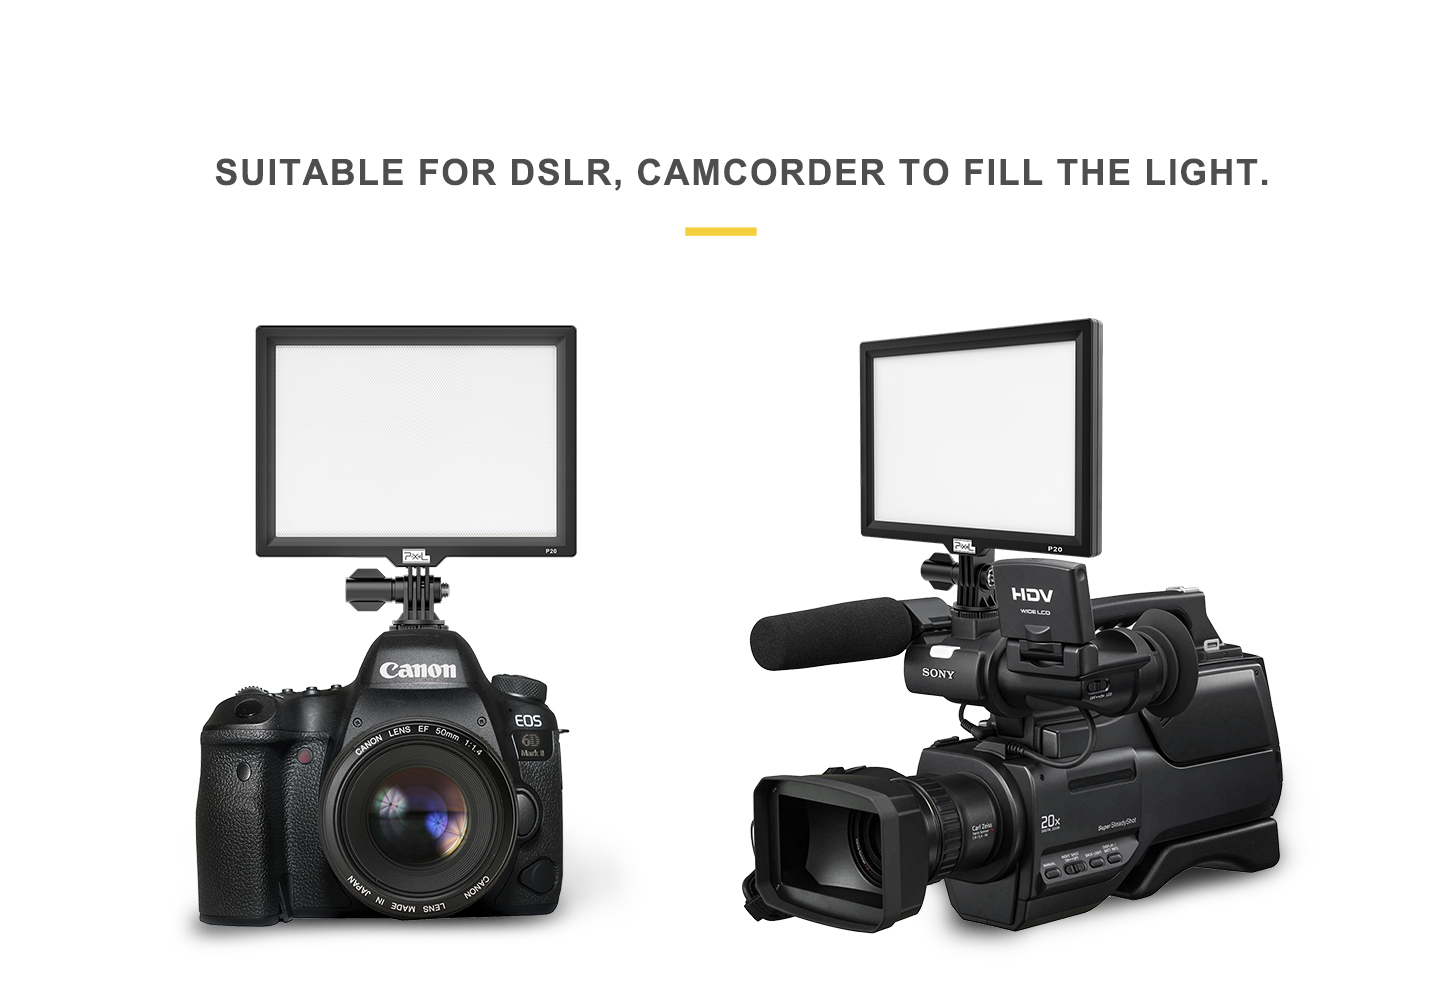 SUITABLE FOR DSLR, CAMCORDER TO FILL THE LIGHT